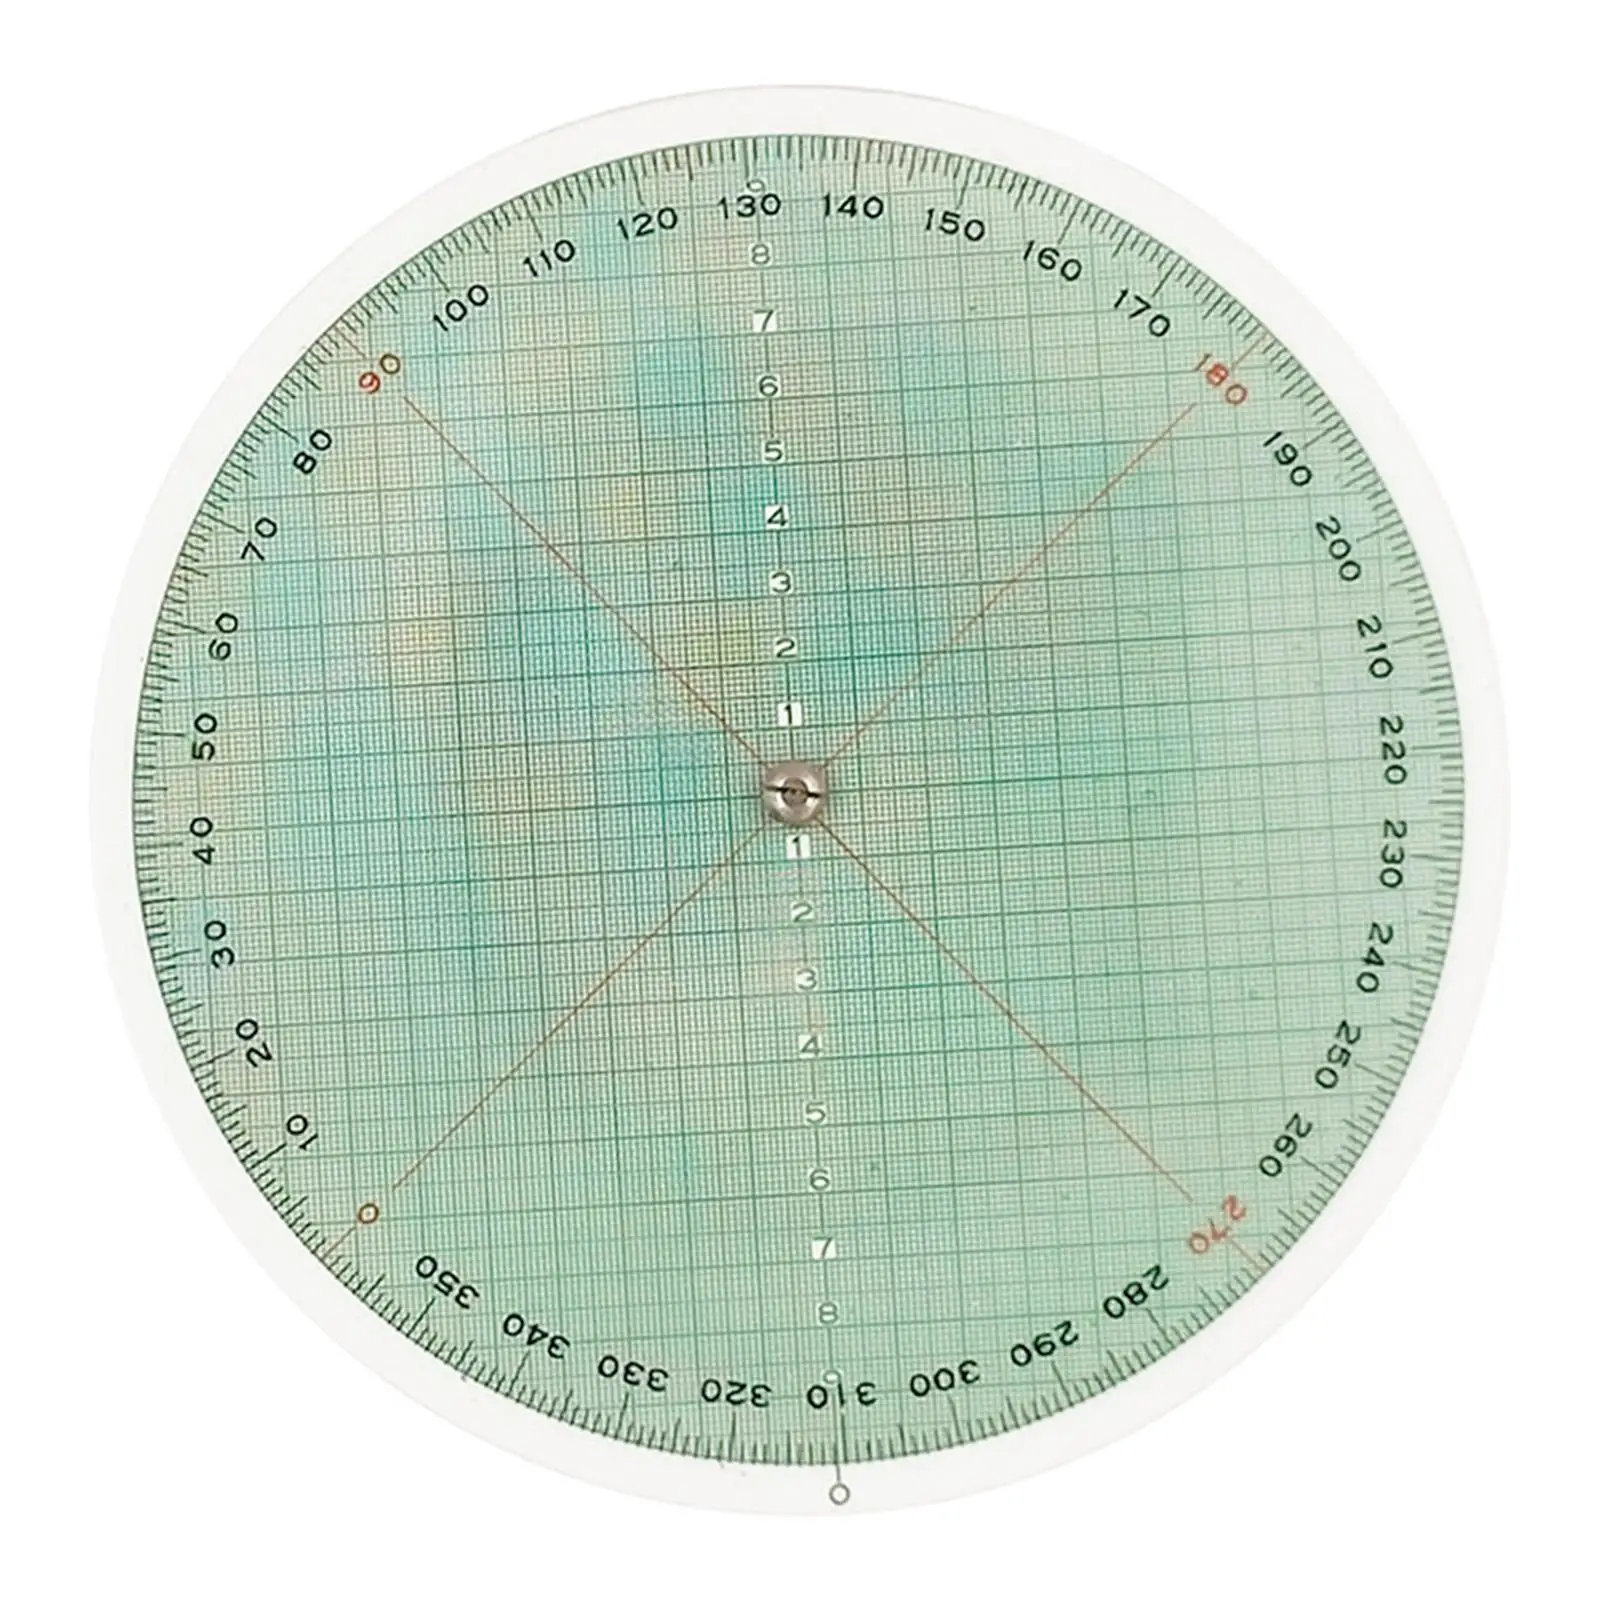 Nautical Slide Rule Attachments Measuring Scale Lightweight Stable Plotting Professional Easy Using Sailing Circular Ruler